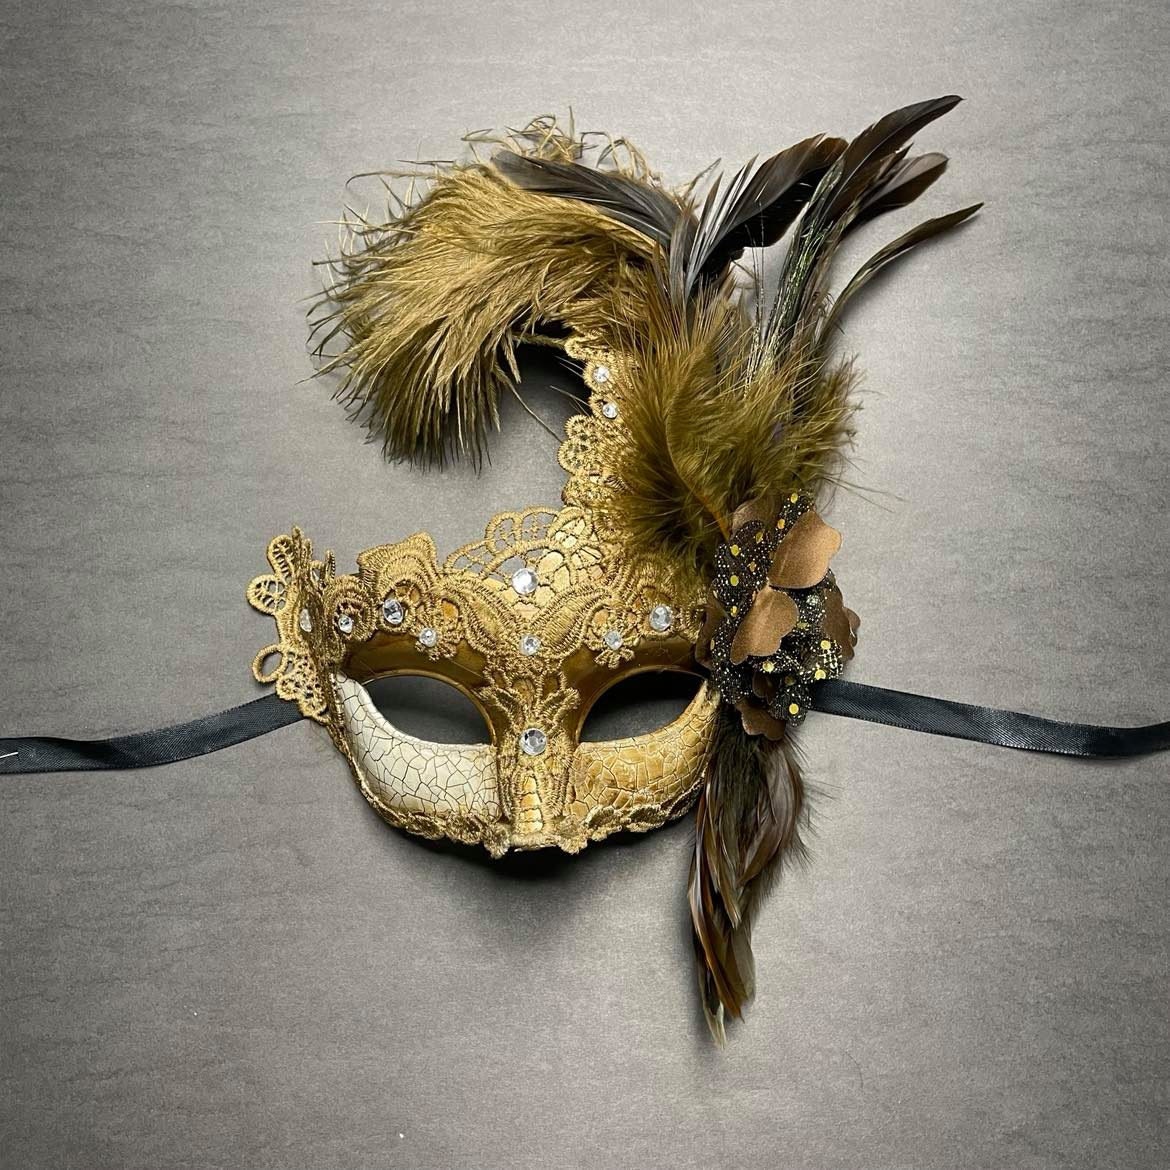 Masquerade Mask, Gold Masquerade Mask, Masquerade Ball Masks, Mardi Gras  Mask, Masquerade Ball Masks, Full Face Lace Metal Mask 